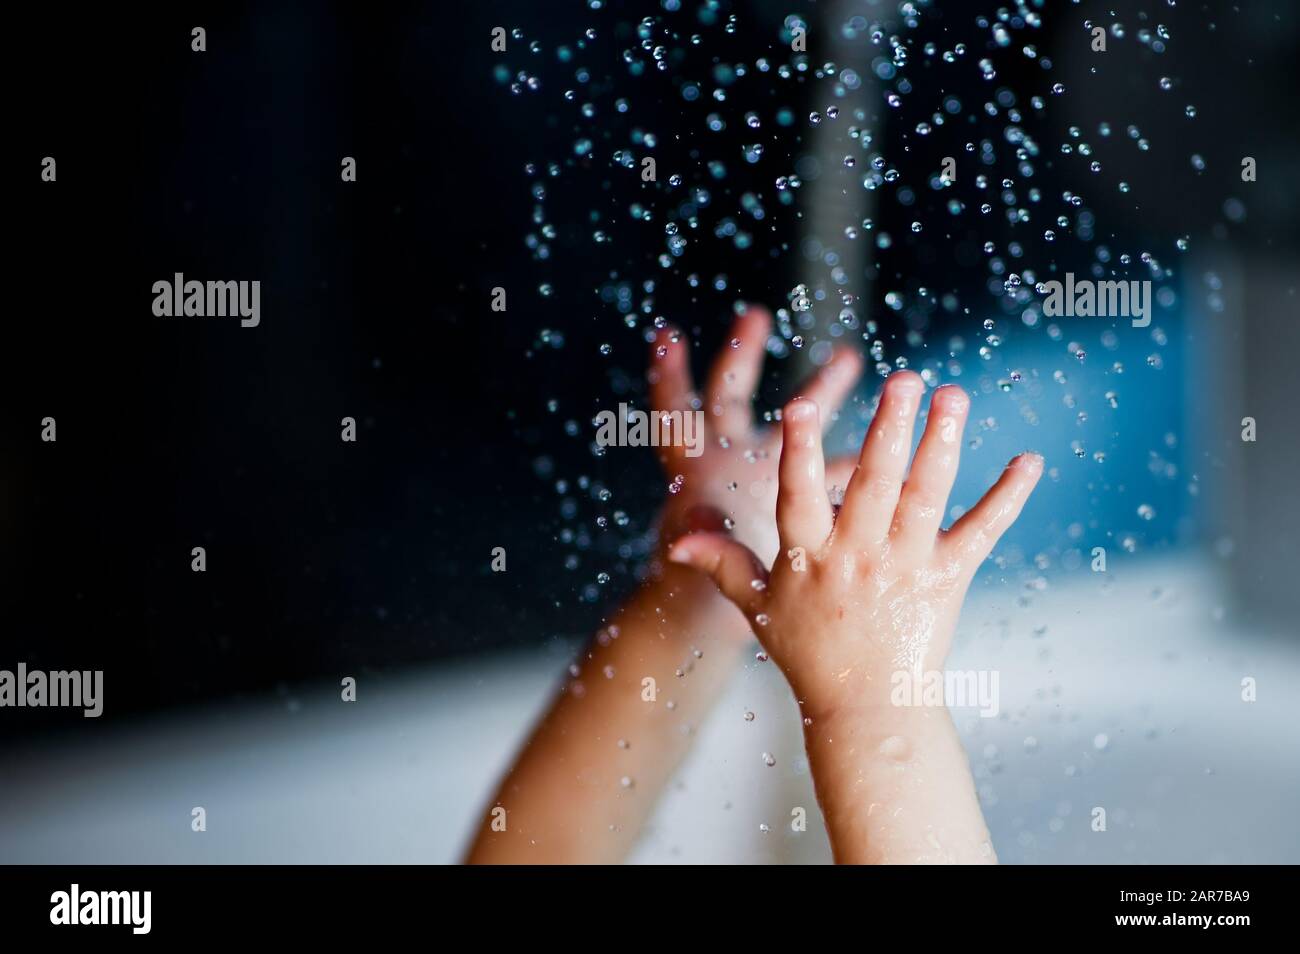 hands of a small child reach for water close-up Stock Photo